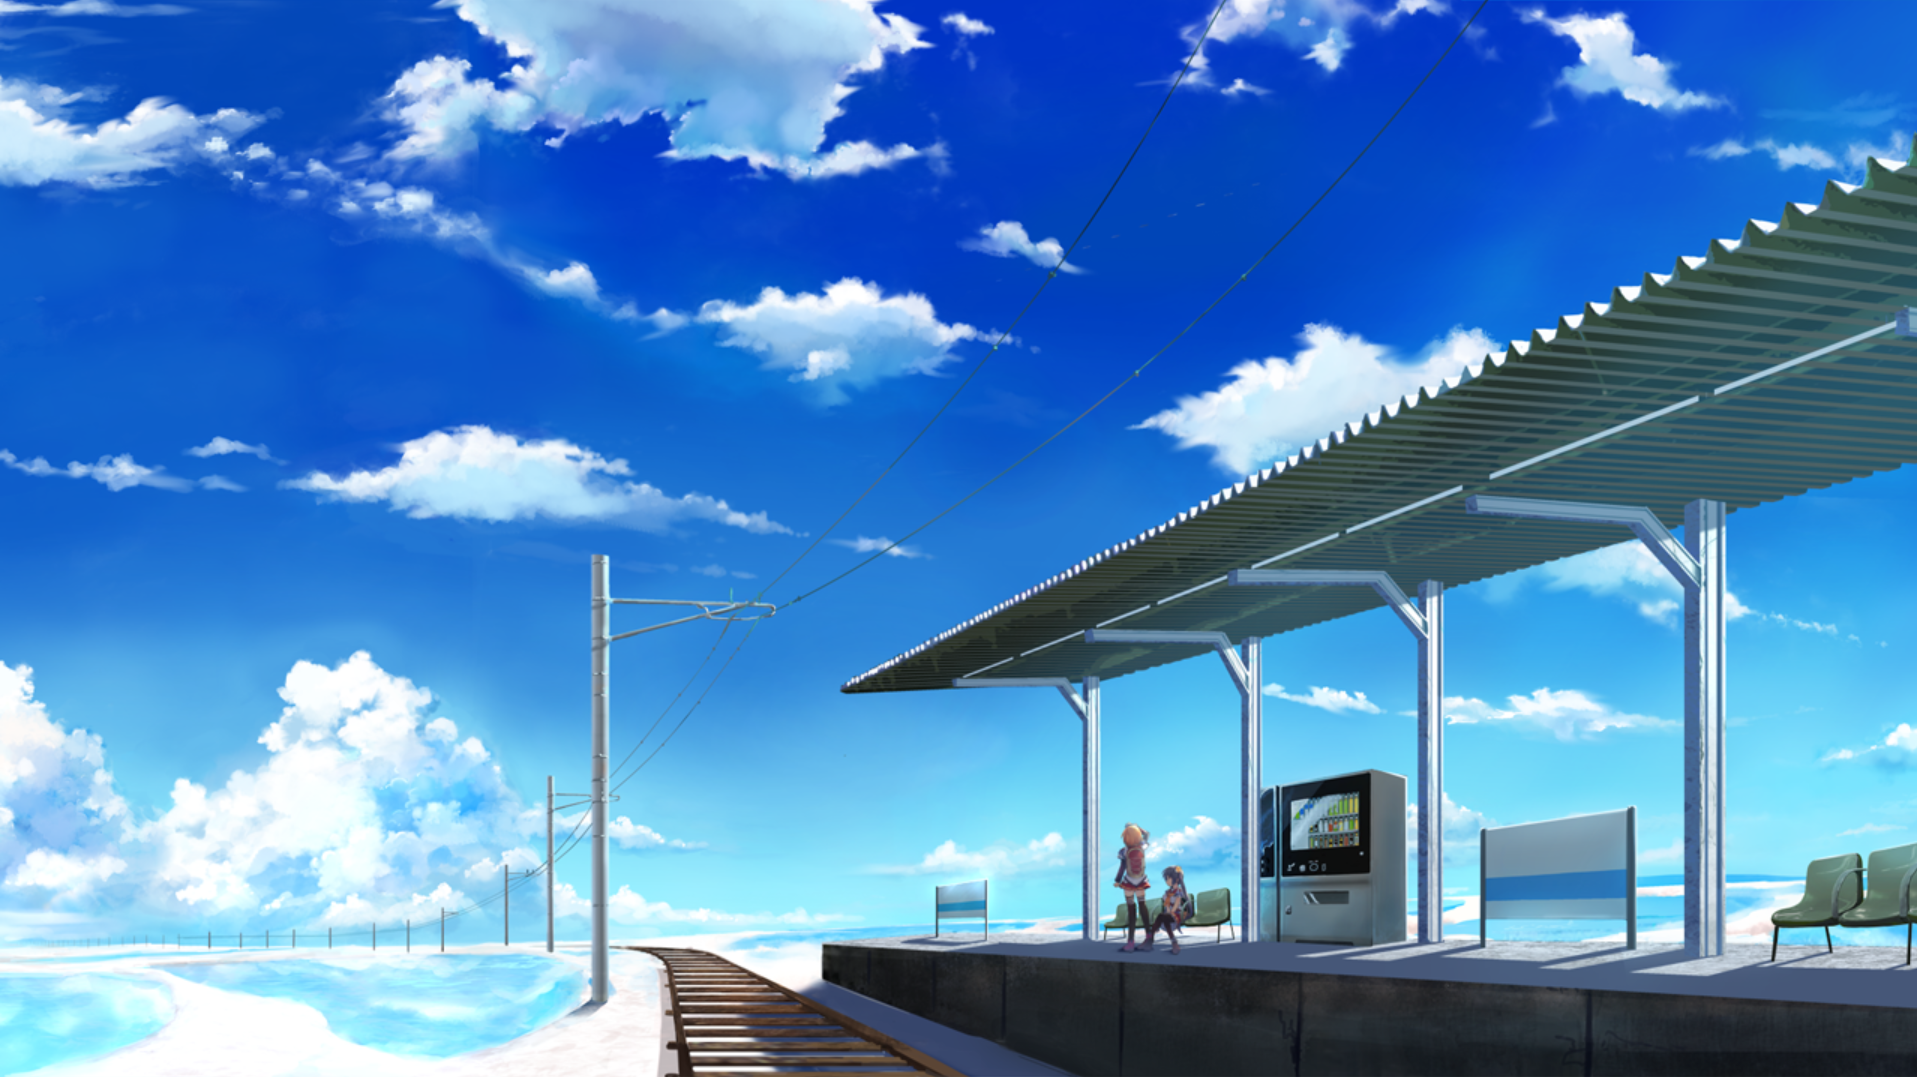 Anime 1917x1077 Camus In The Blue Sky sky galgame clouds anime girls sitting bench standing backpacks railway vending machine